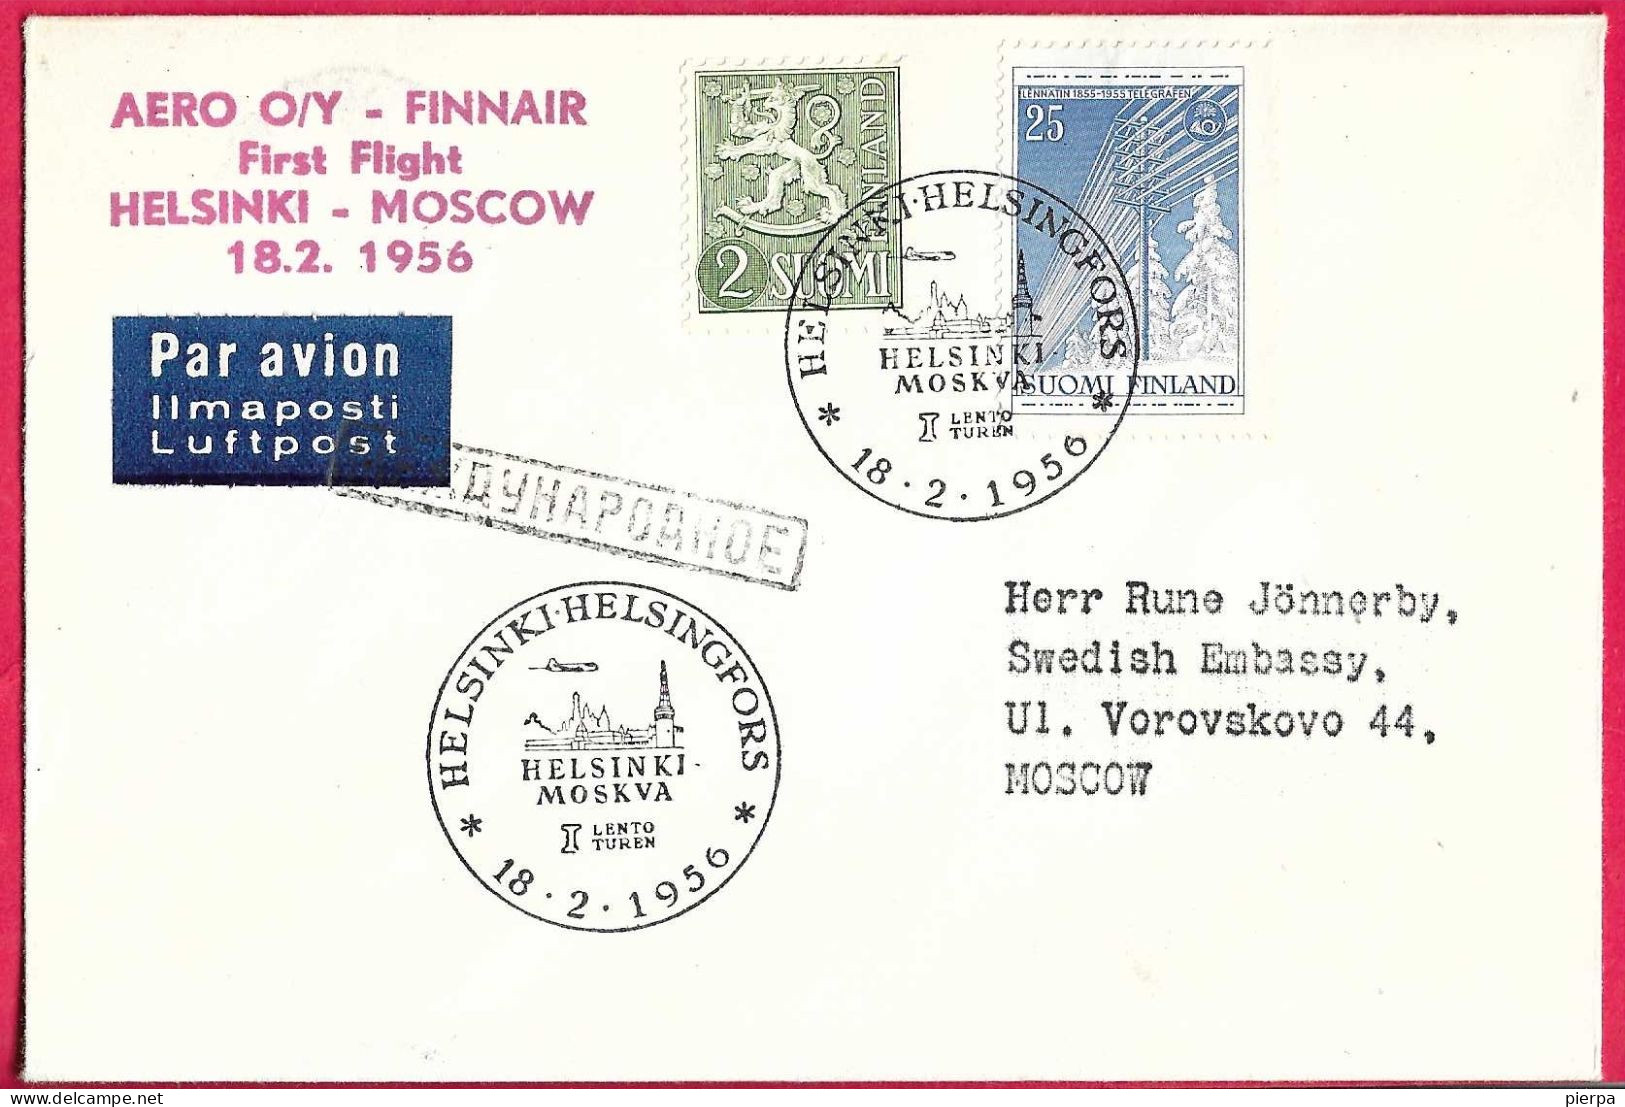 FINLAND - FIRST JET FLIGHT FINNAIR  FROM HELSINKI TO MOSKOW * 18.2.1956* ON OFFICIAL ENVELOPE - Covers & Documents